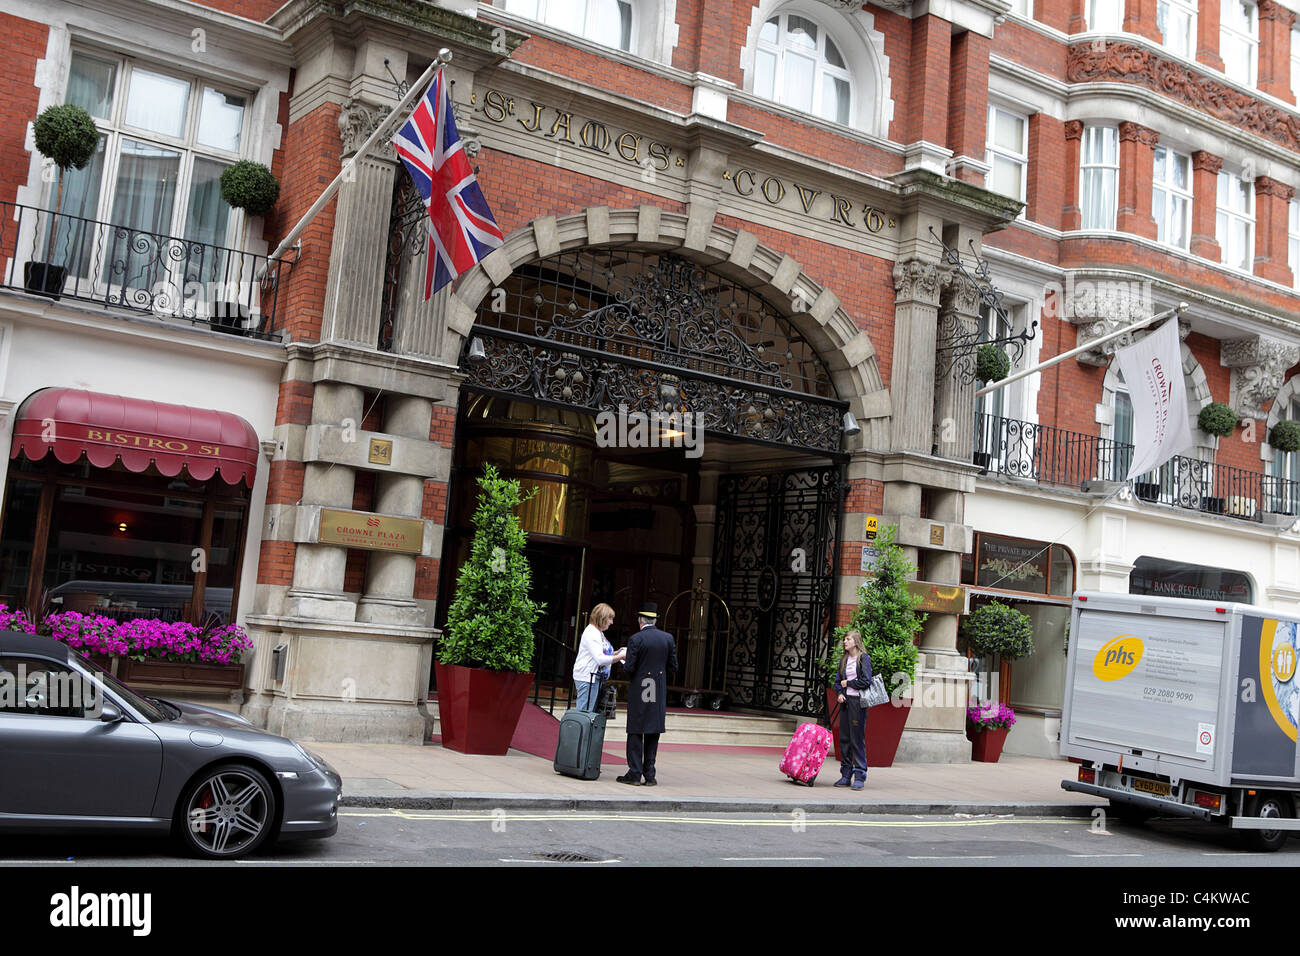 CROWNE PLAZA LONDON-ST JAMES HOTEL, situated in Buckingham Gate and ...